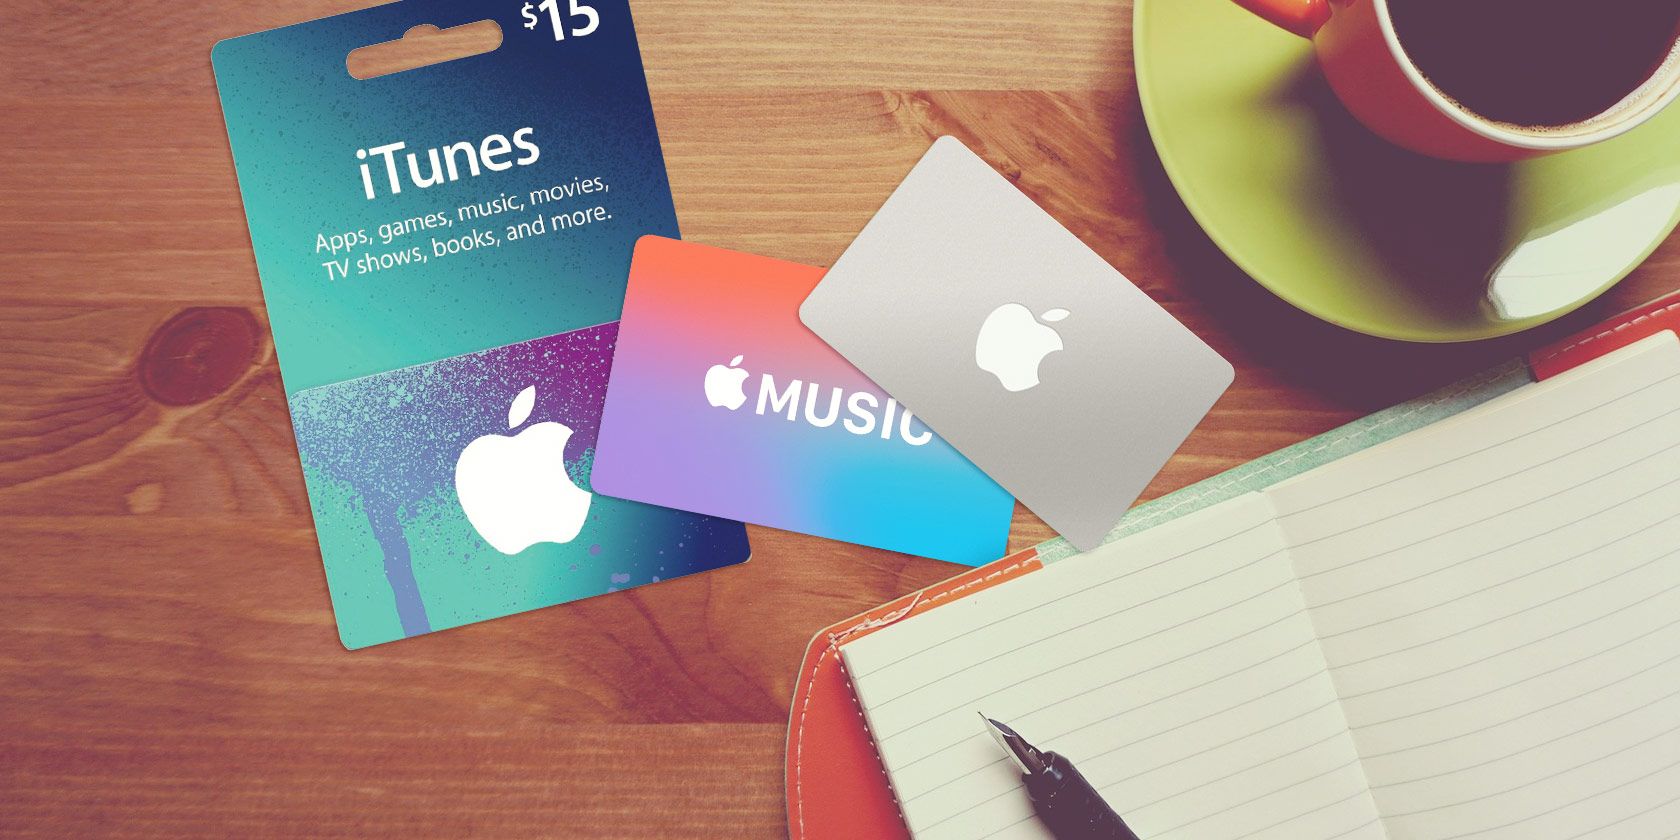 5 Fixes to Try if You Can't Redeem Your Apple Gift Card